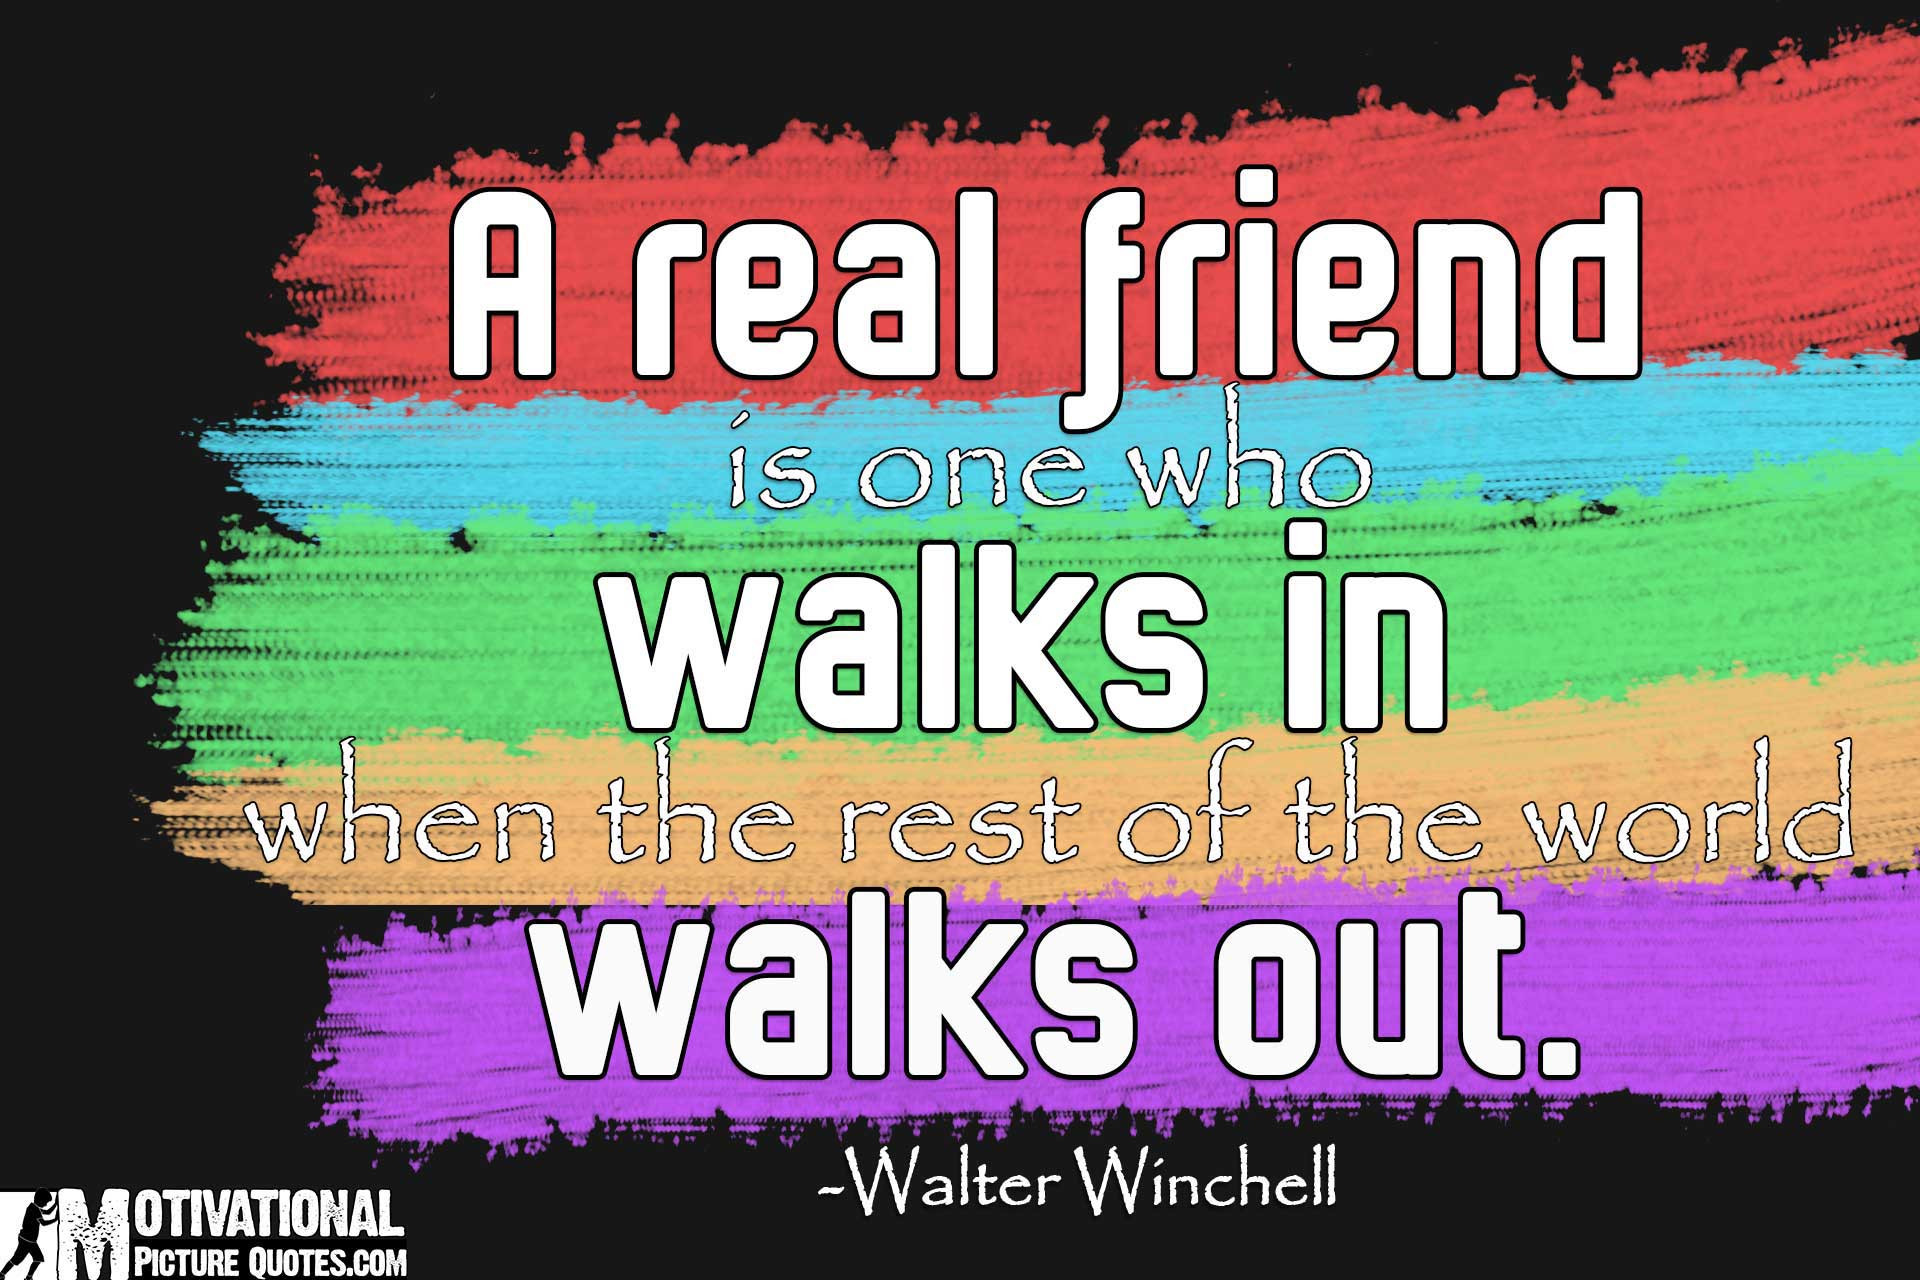 Inspirational Friend Quotes
 25 Inspirational Friendship Quotes